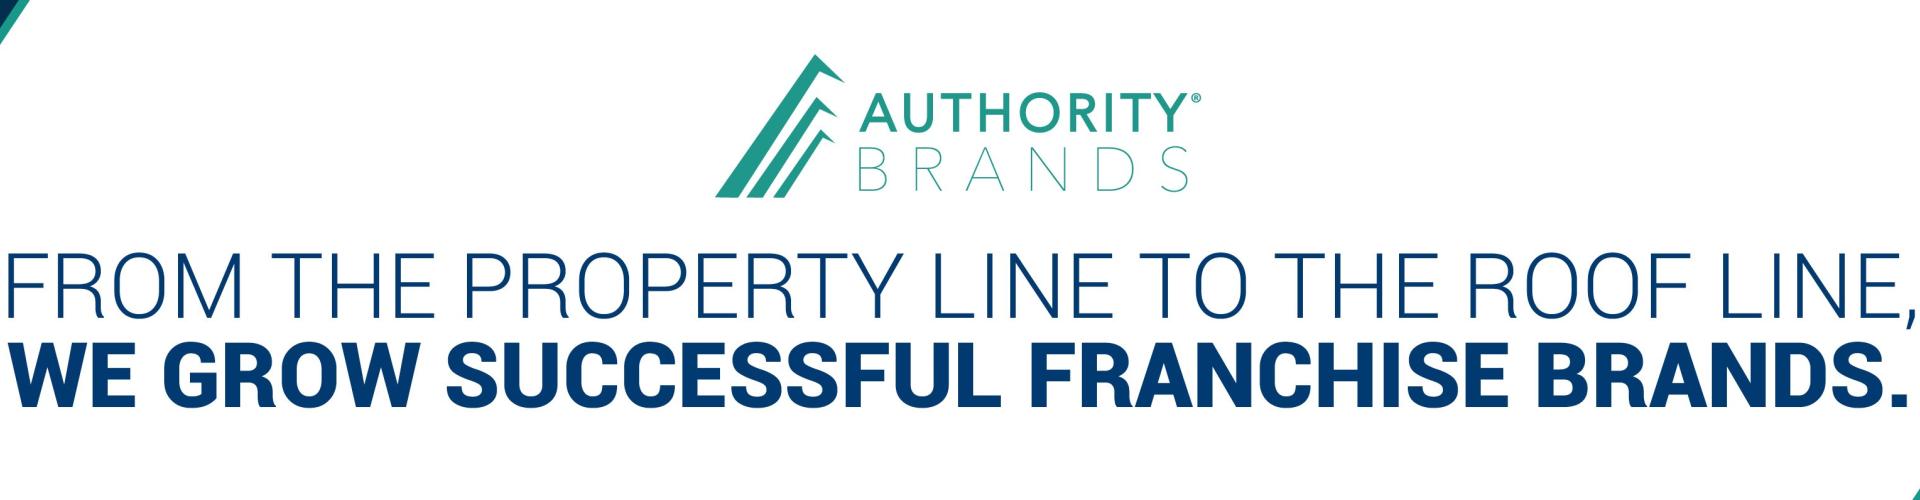 Authority Brands cover